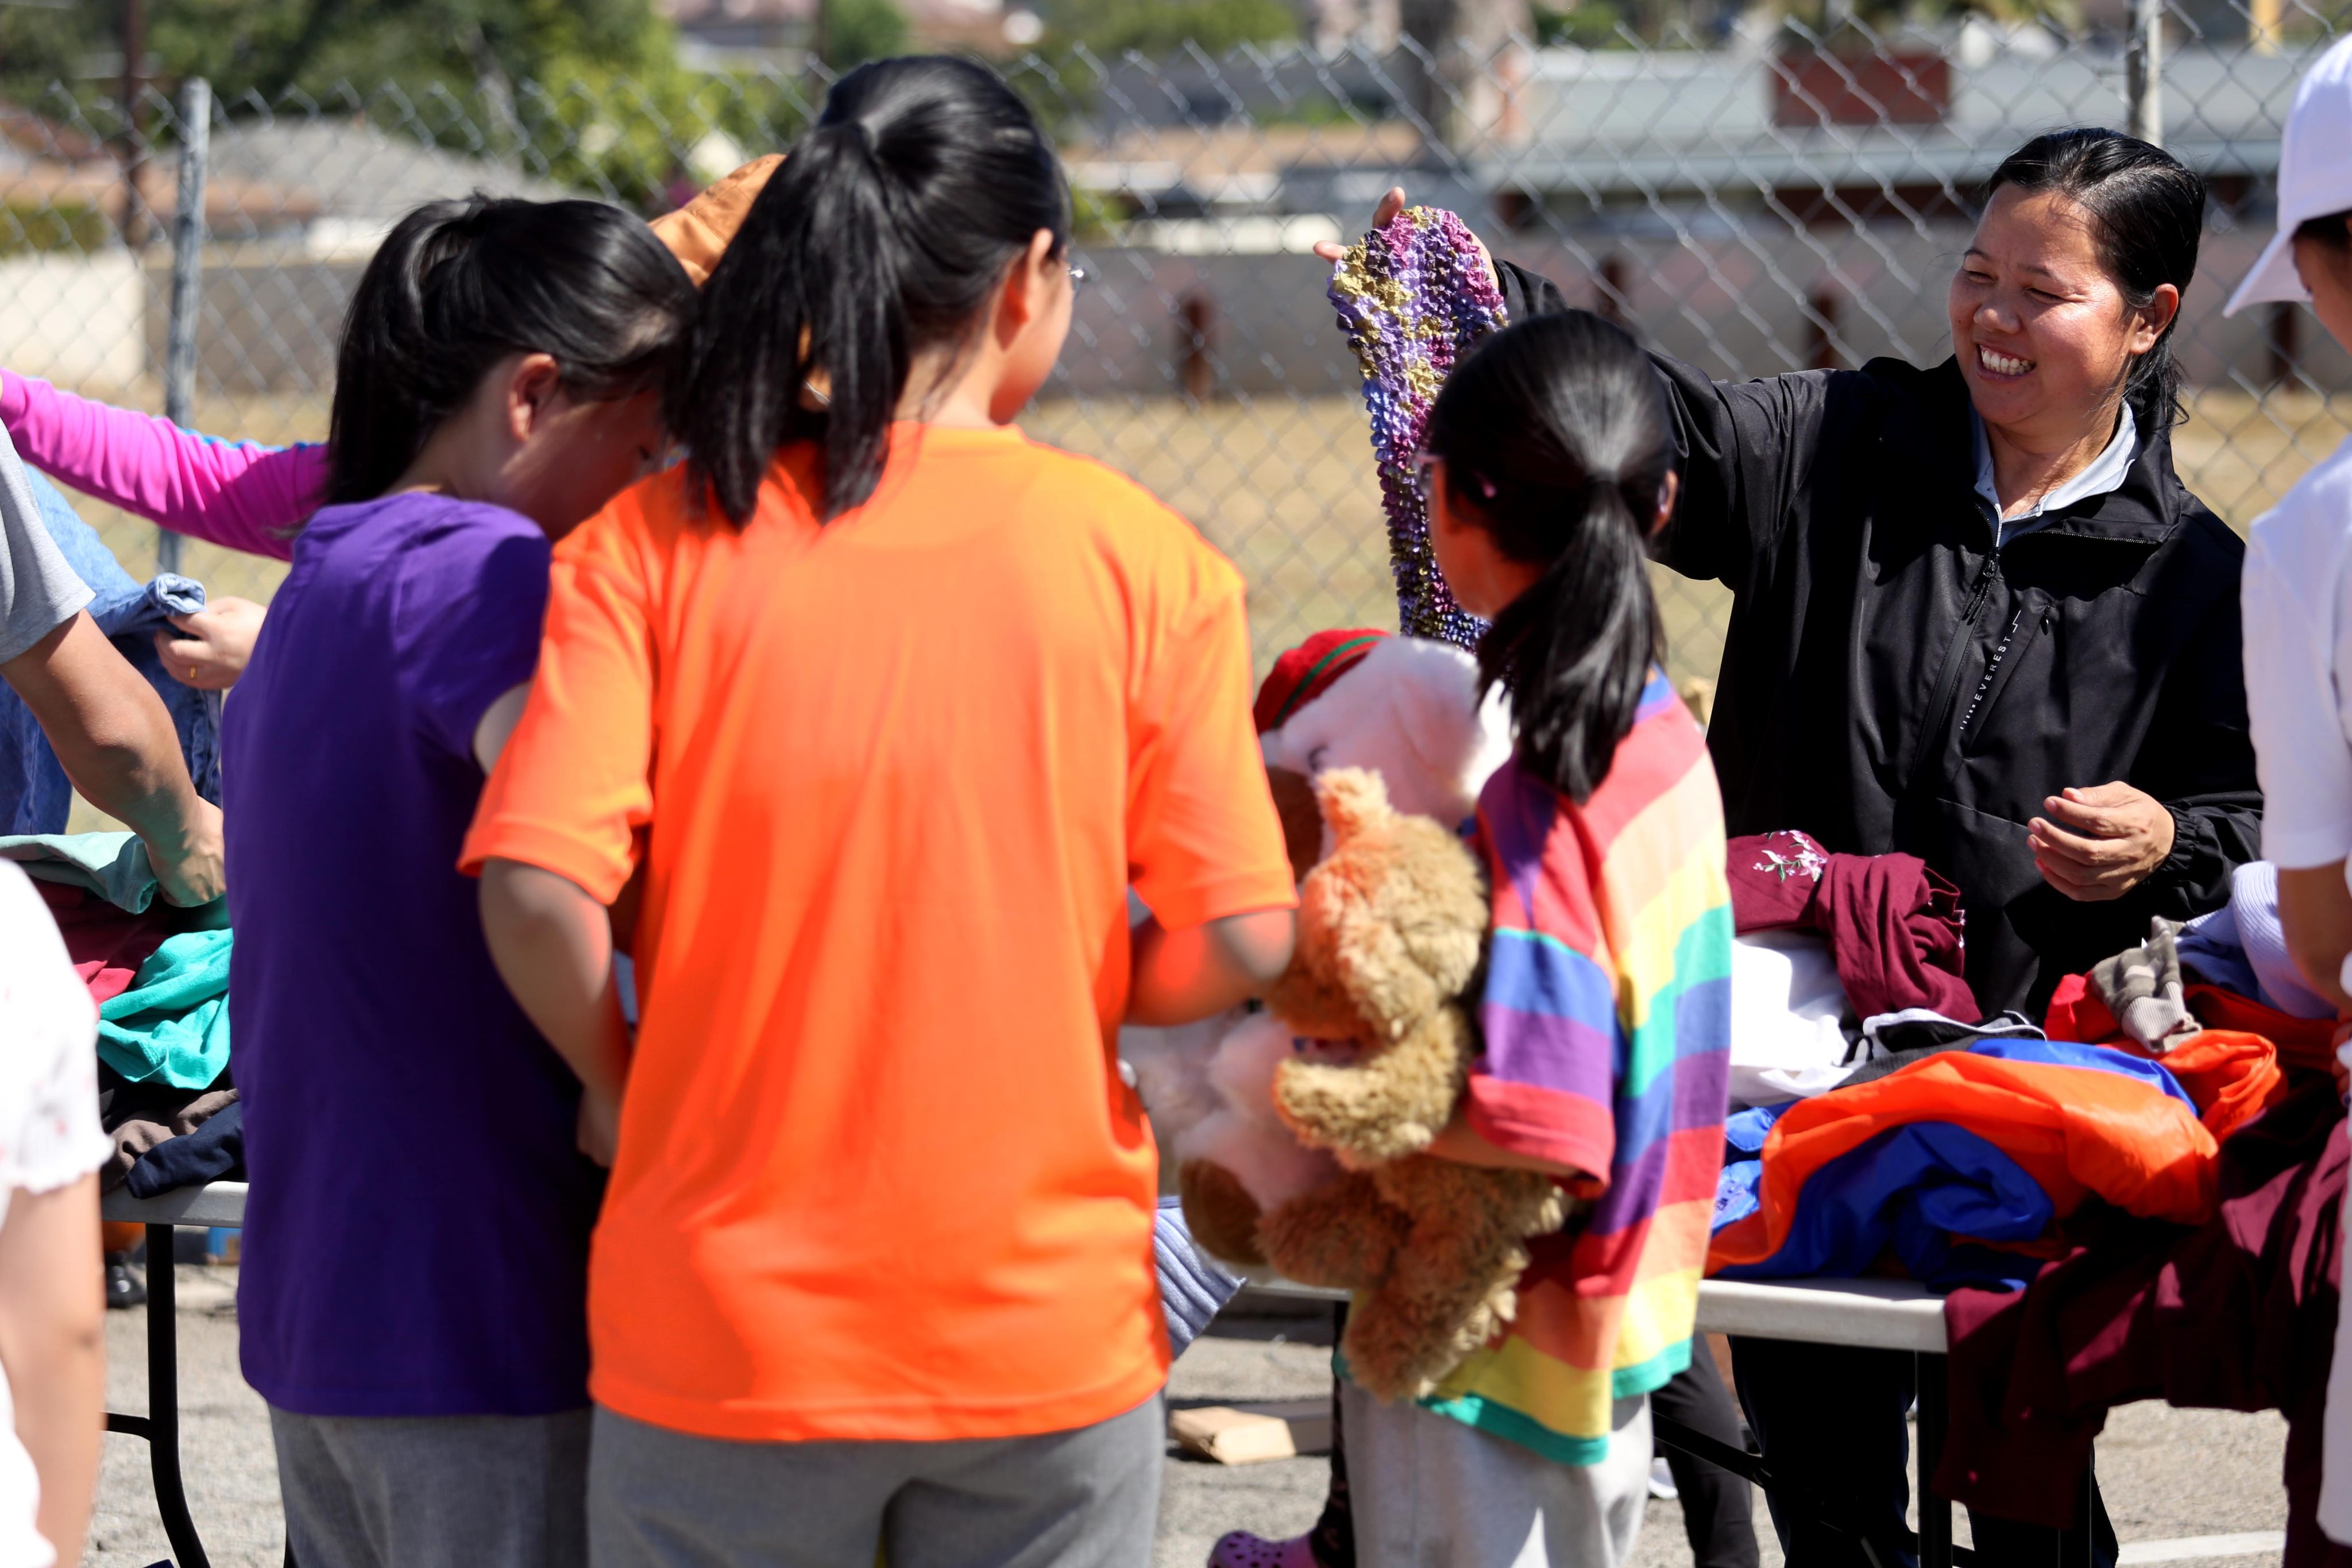 A woman who identified herself with the surname Dai, right, offers donated clothing to Chinese migrants at a giveaway event in Monterey Park in June. Photo: TNS